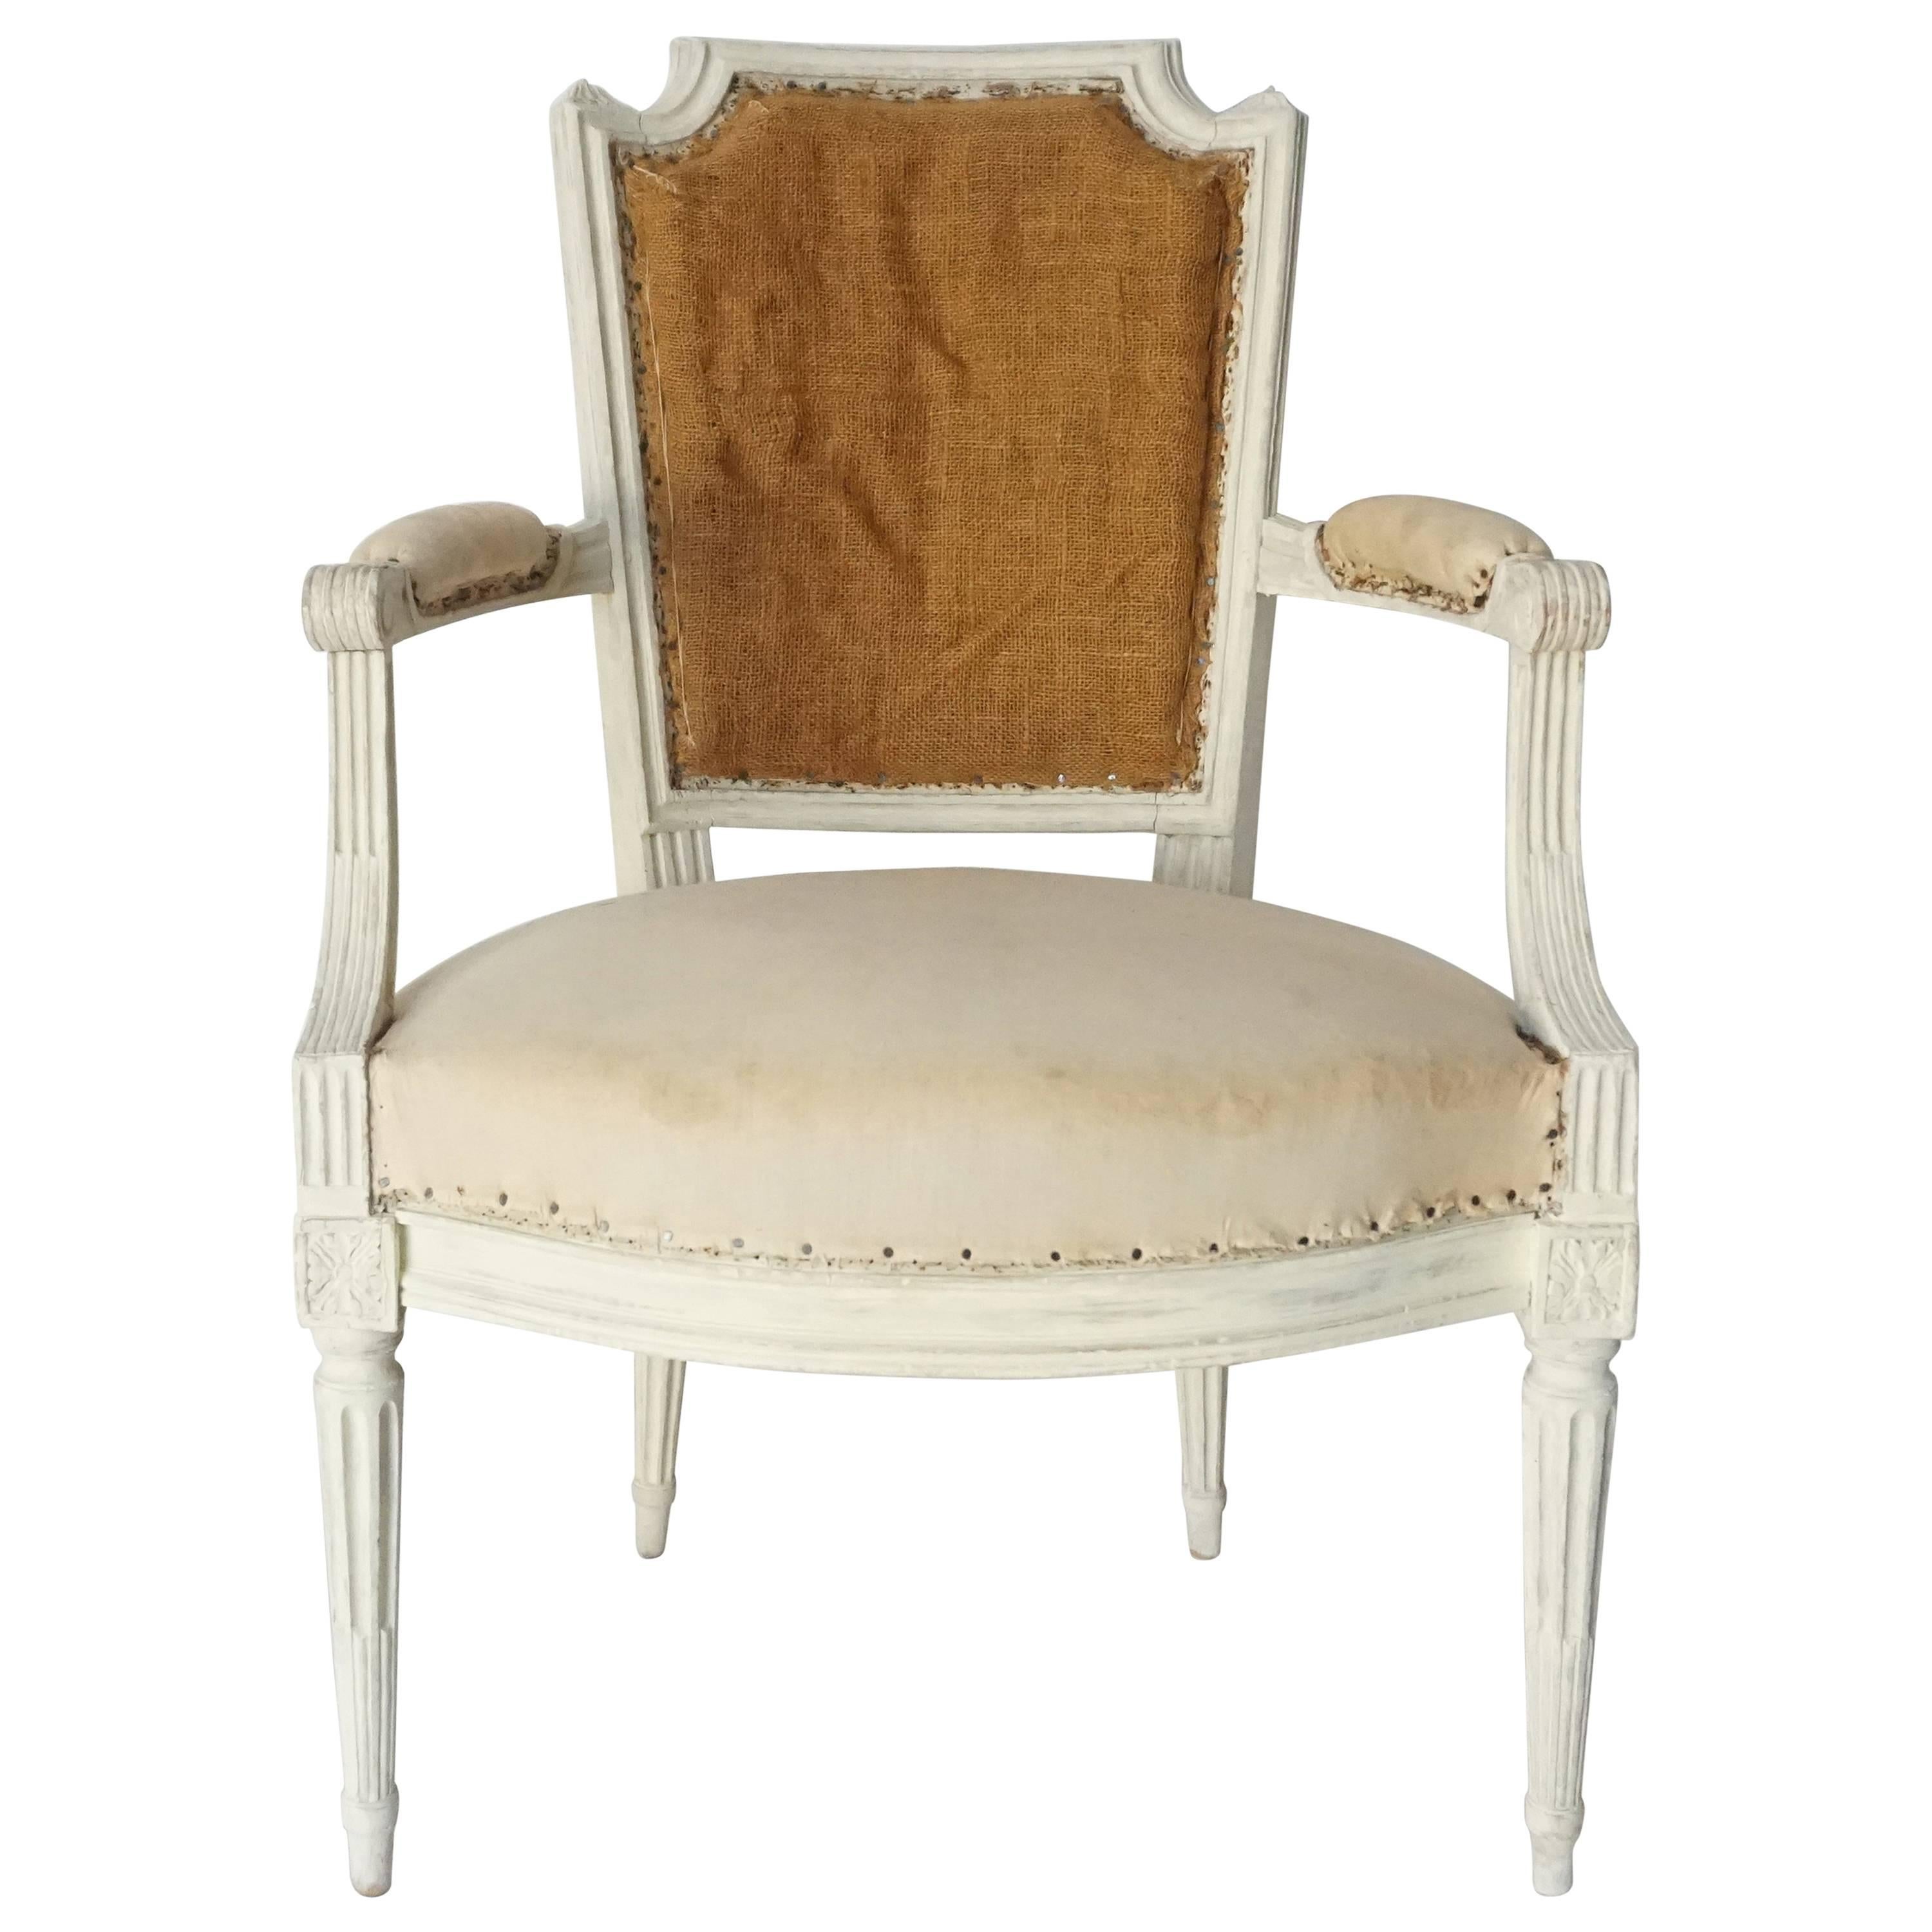 Louis XVI Fauteuil or Armchair in Original Paint, Stamped, France, circa 1780